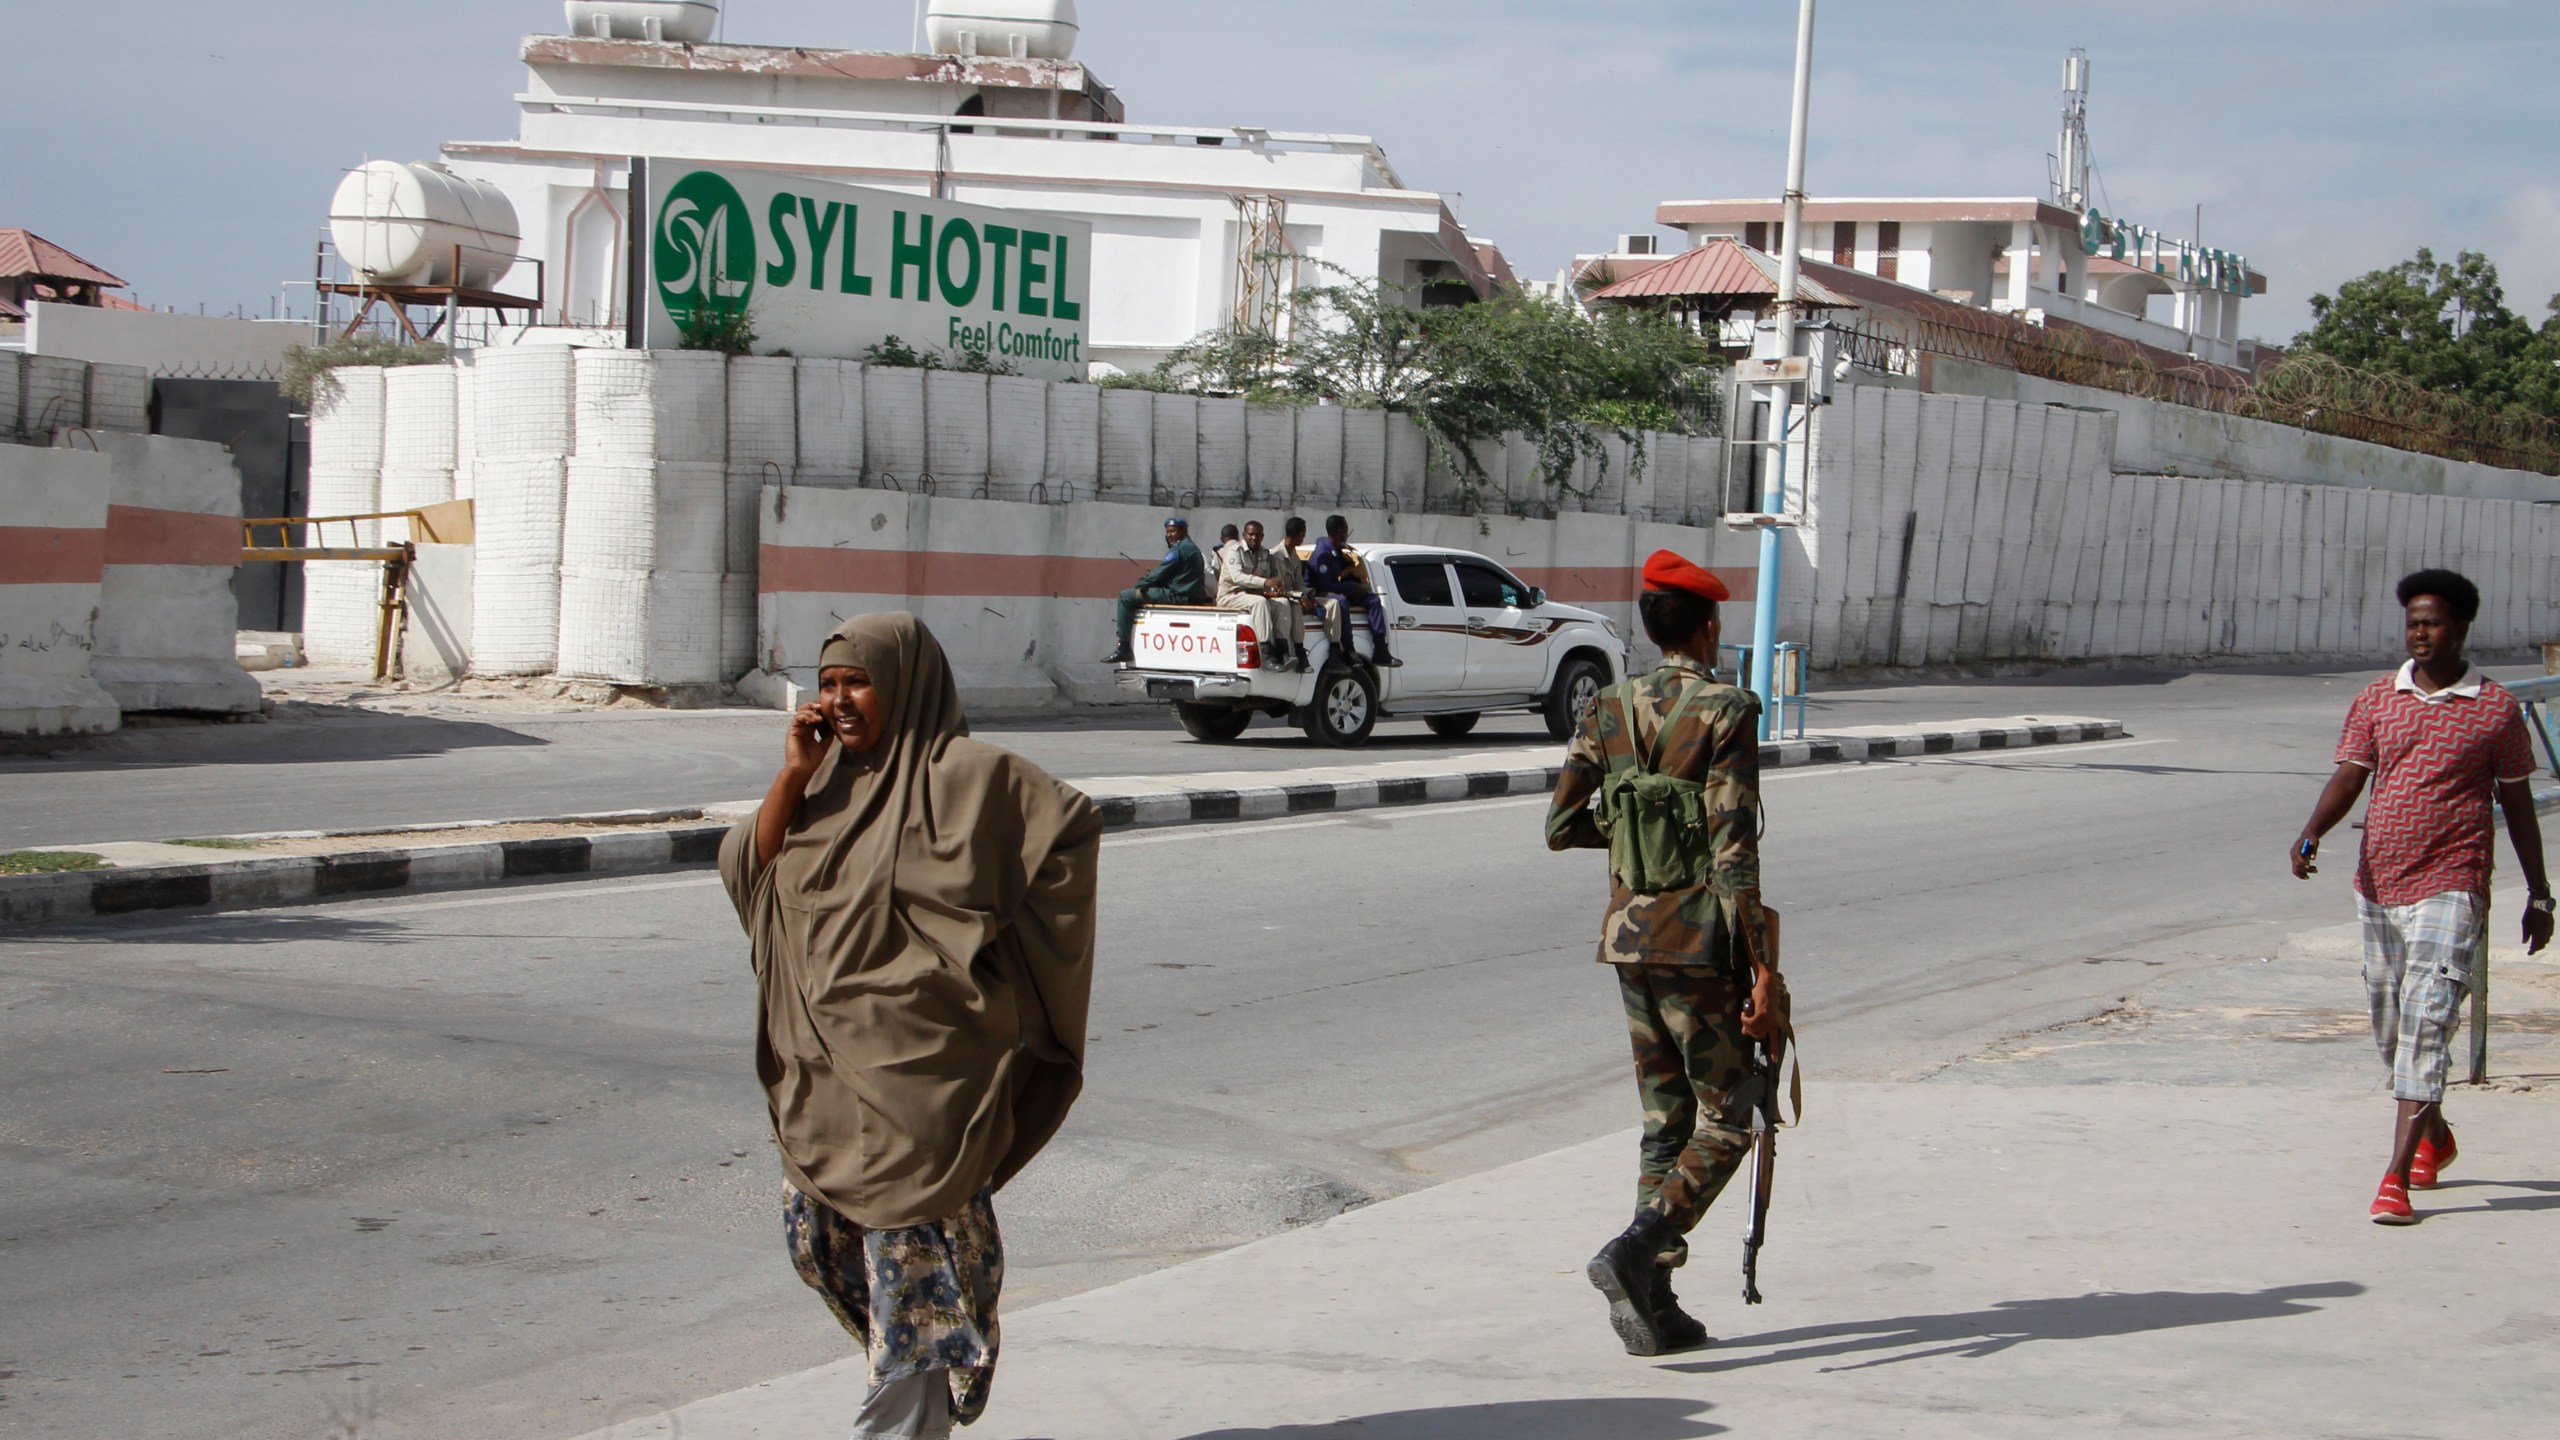 FILE - Somali security forces guard the entrance to the SYL hotel which was attacked by al-Shabab Islamic extremist rebels on Tuesday night, in Mogadishu, Somalia Wednesday, Dec. 11, 2019. The Somali extremist group al-Shabab says on Thursday, March 14, 2024, its fighters have attacked a hotel in the capital Mogadishu, where a loud explosion and gunfire have been heard. Al-Shabab said on its Telegram channel that its fighters managed to penetrate the SYL hotel, which is located not far from the presidential palace in a normally secure part of Mogadishu. (AP Photo/Farah Abdi Warsameh, File)